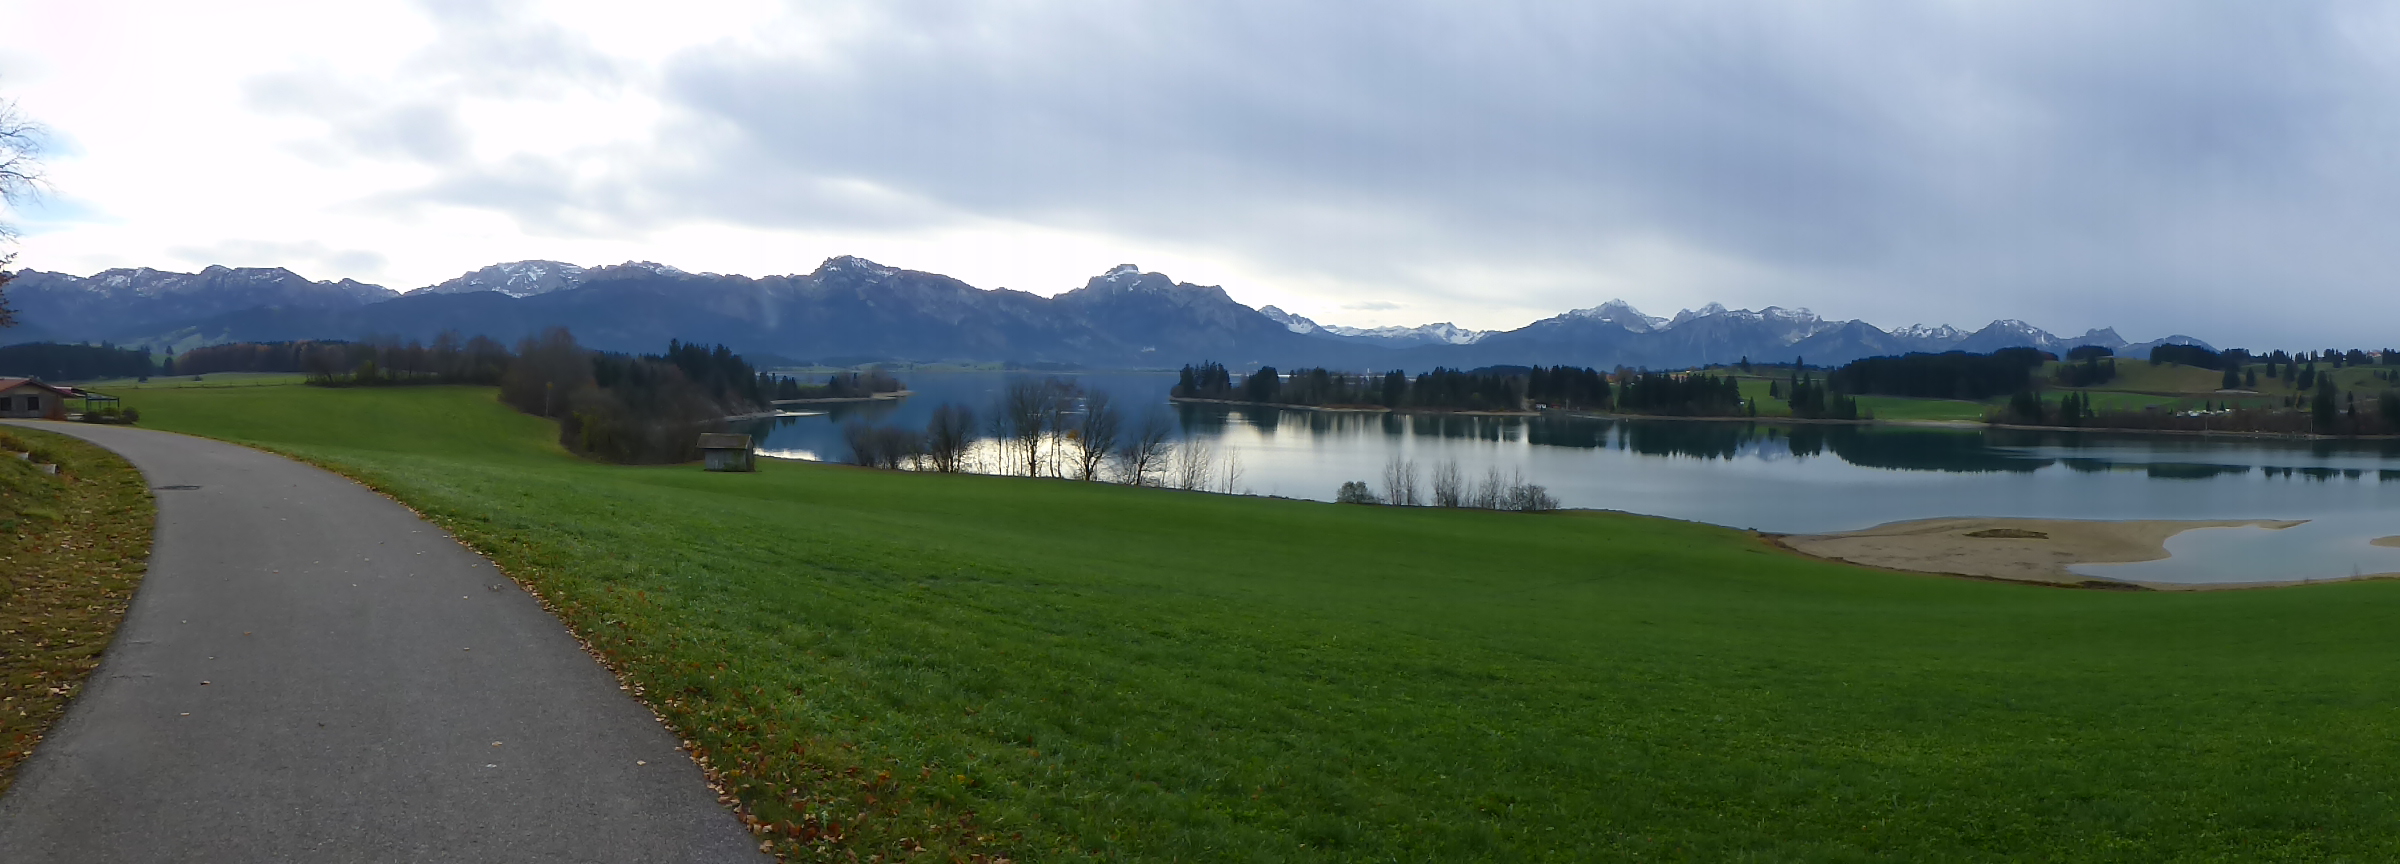 Panorama Forggensee (23.11.2014) Blickrichtung: Süd